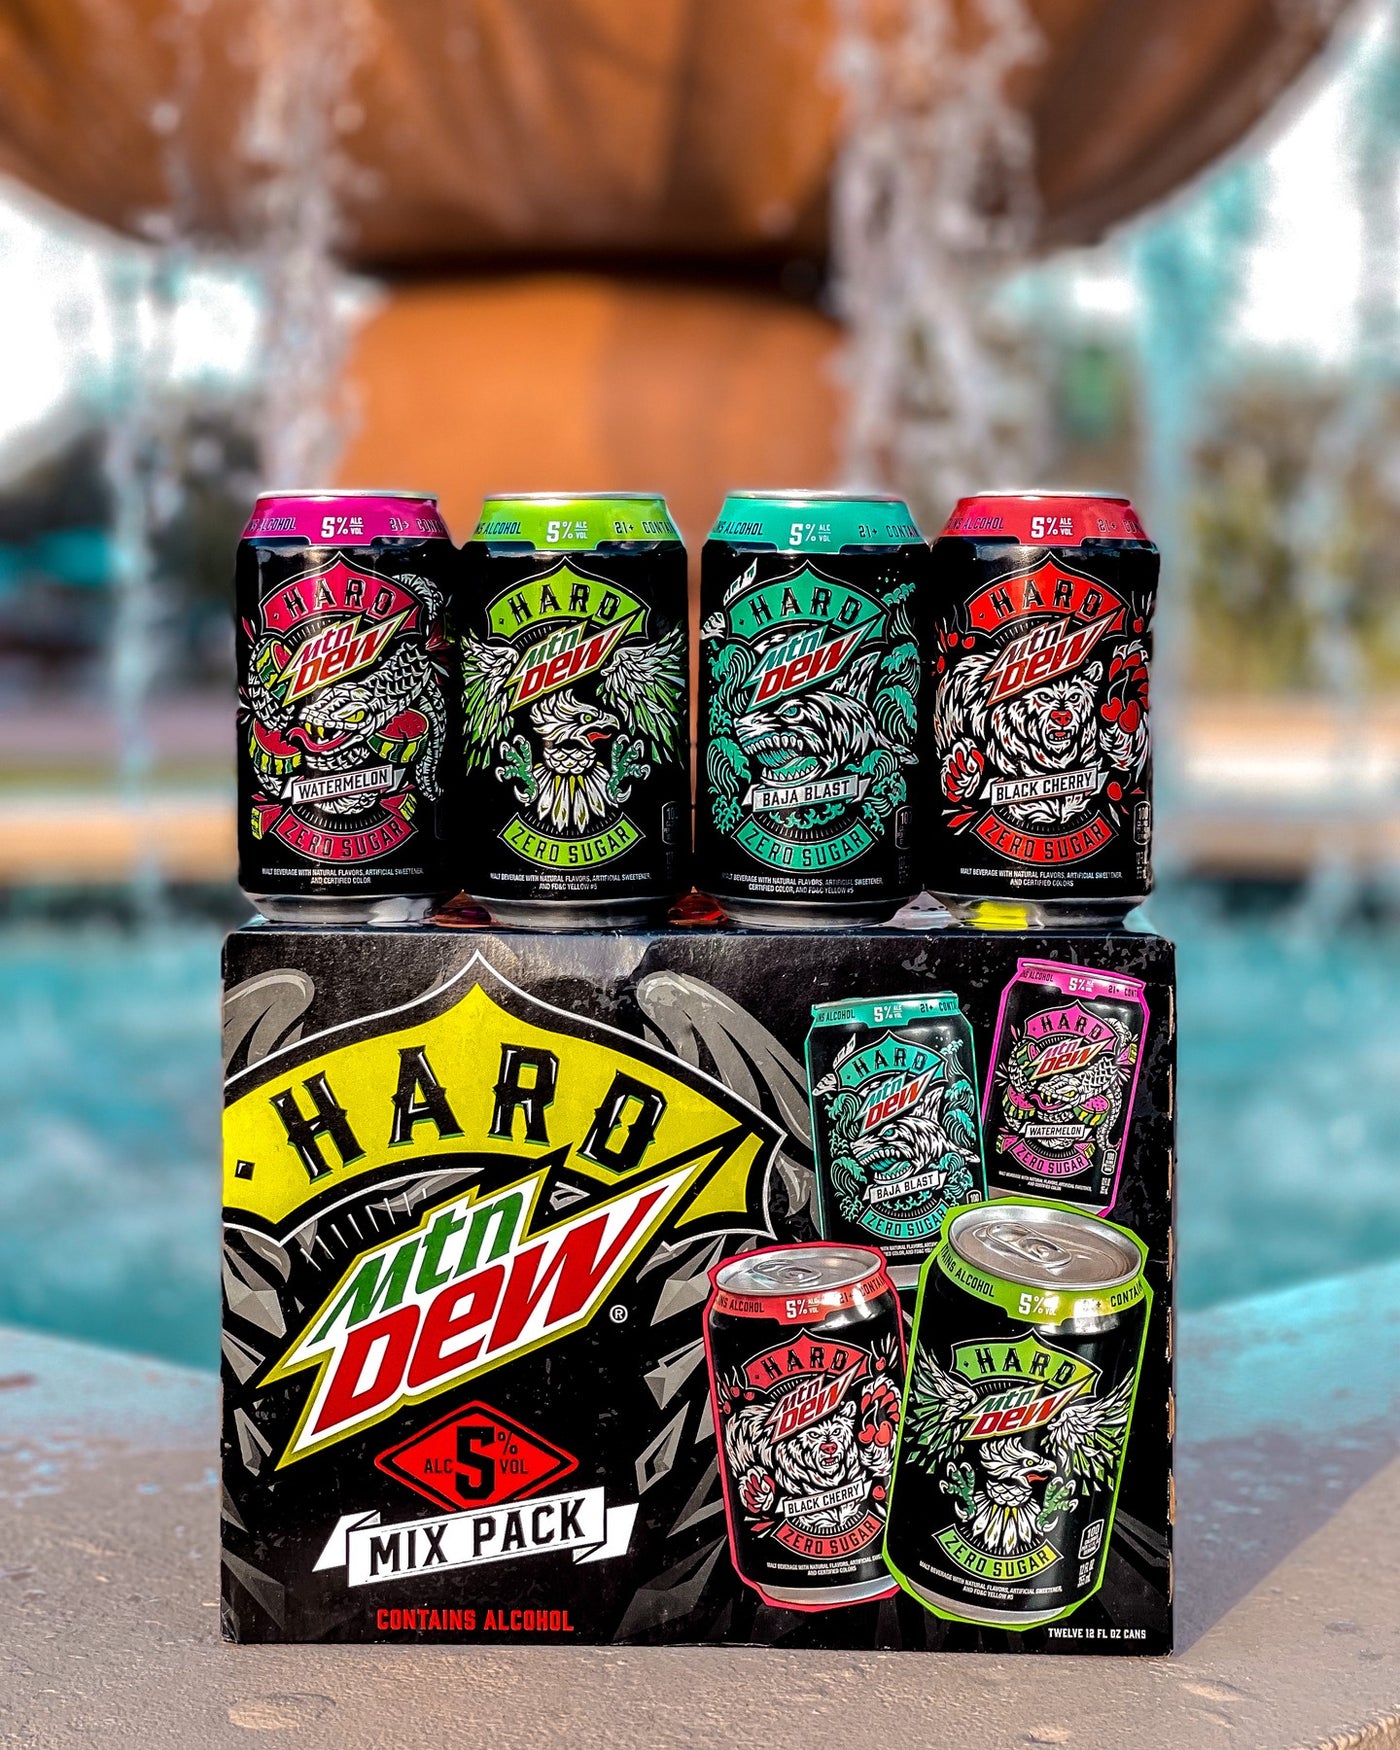 BUY] Hard Mountain Dew Mix Pack (12) Pack Cans (RECOMMENDED) at